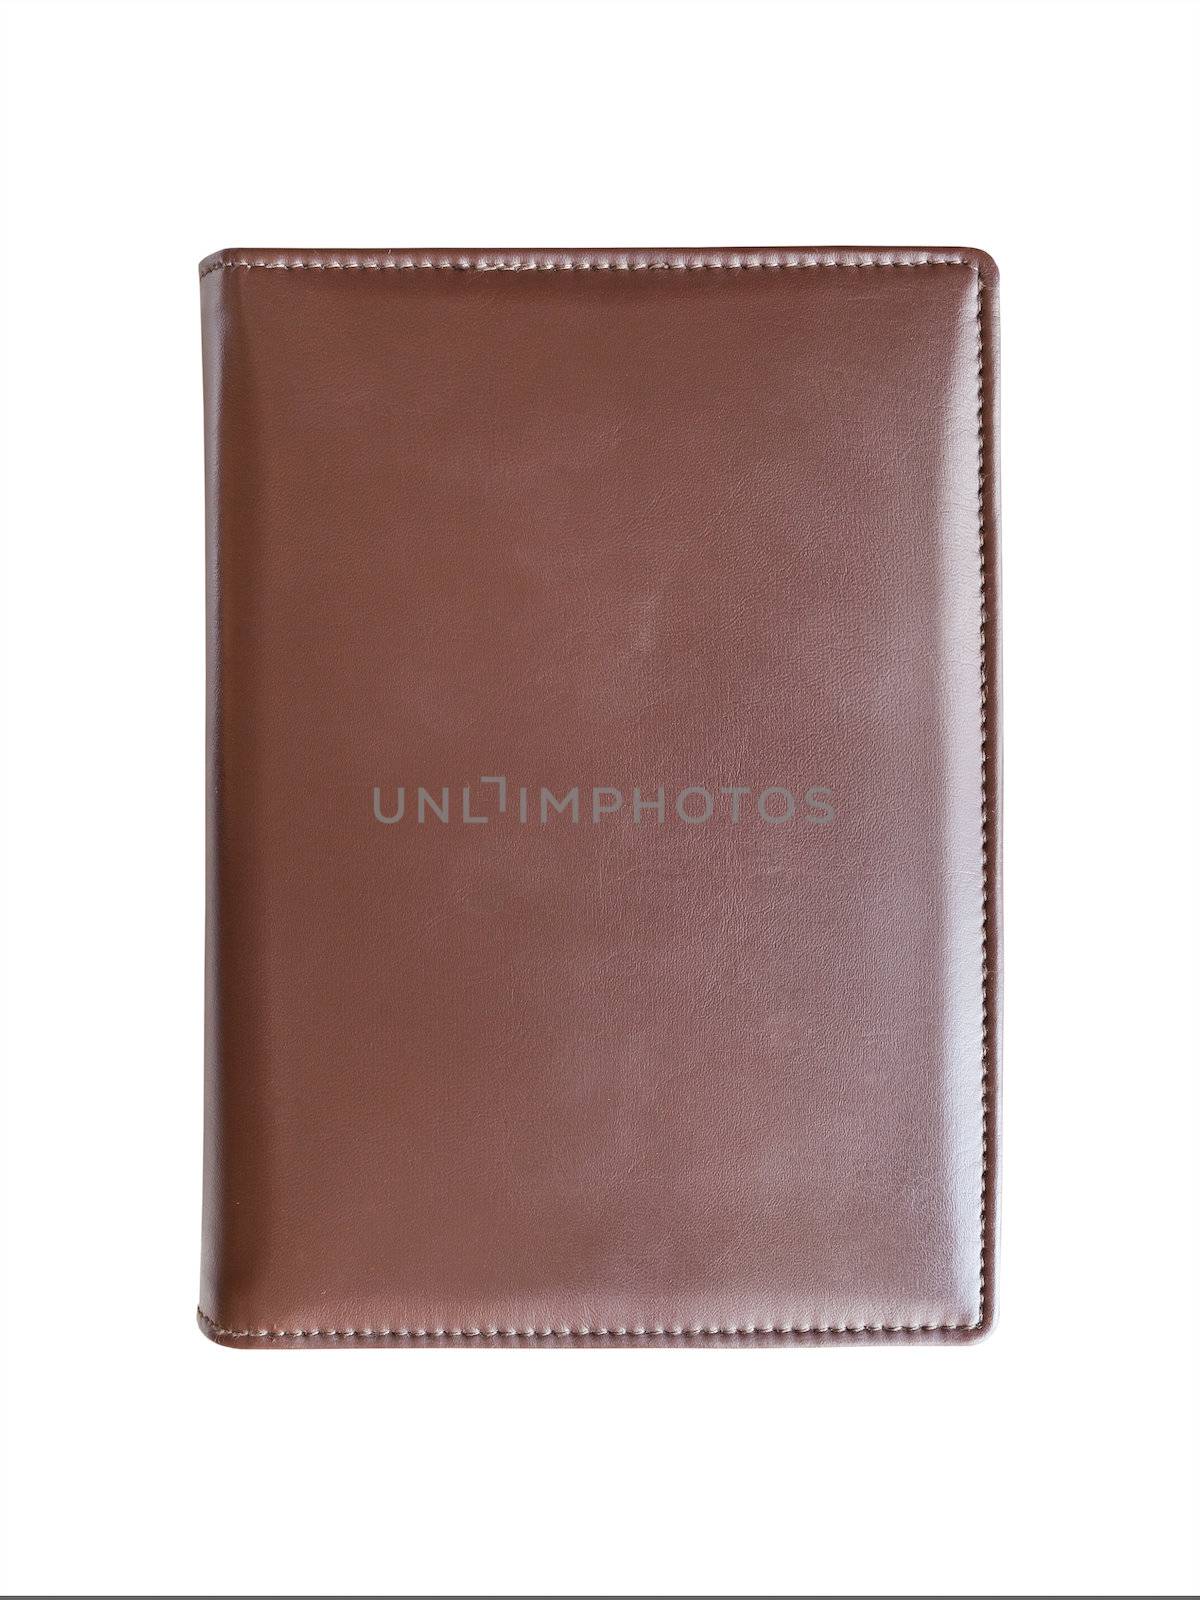 Leather brown book cover